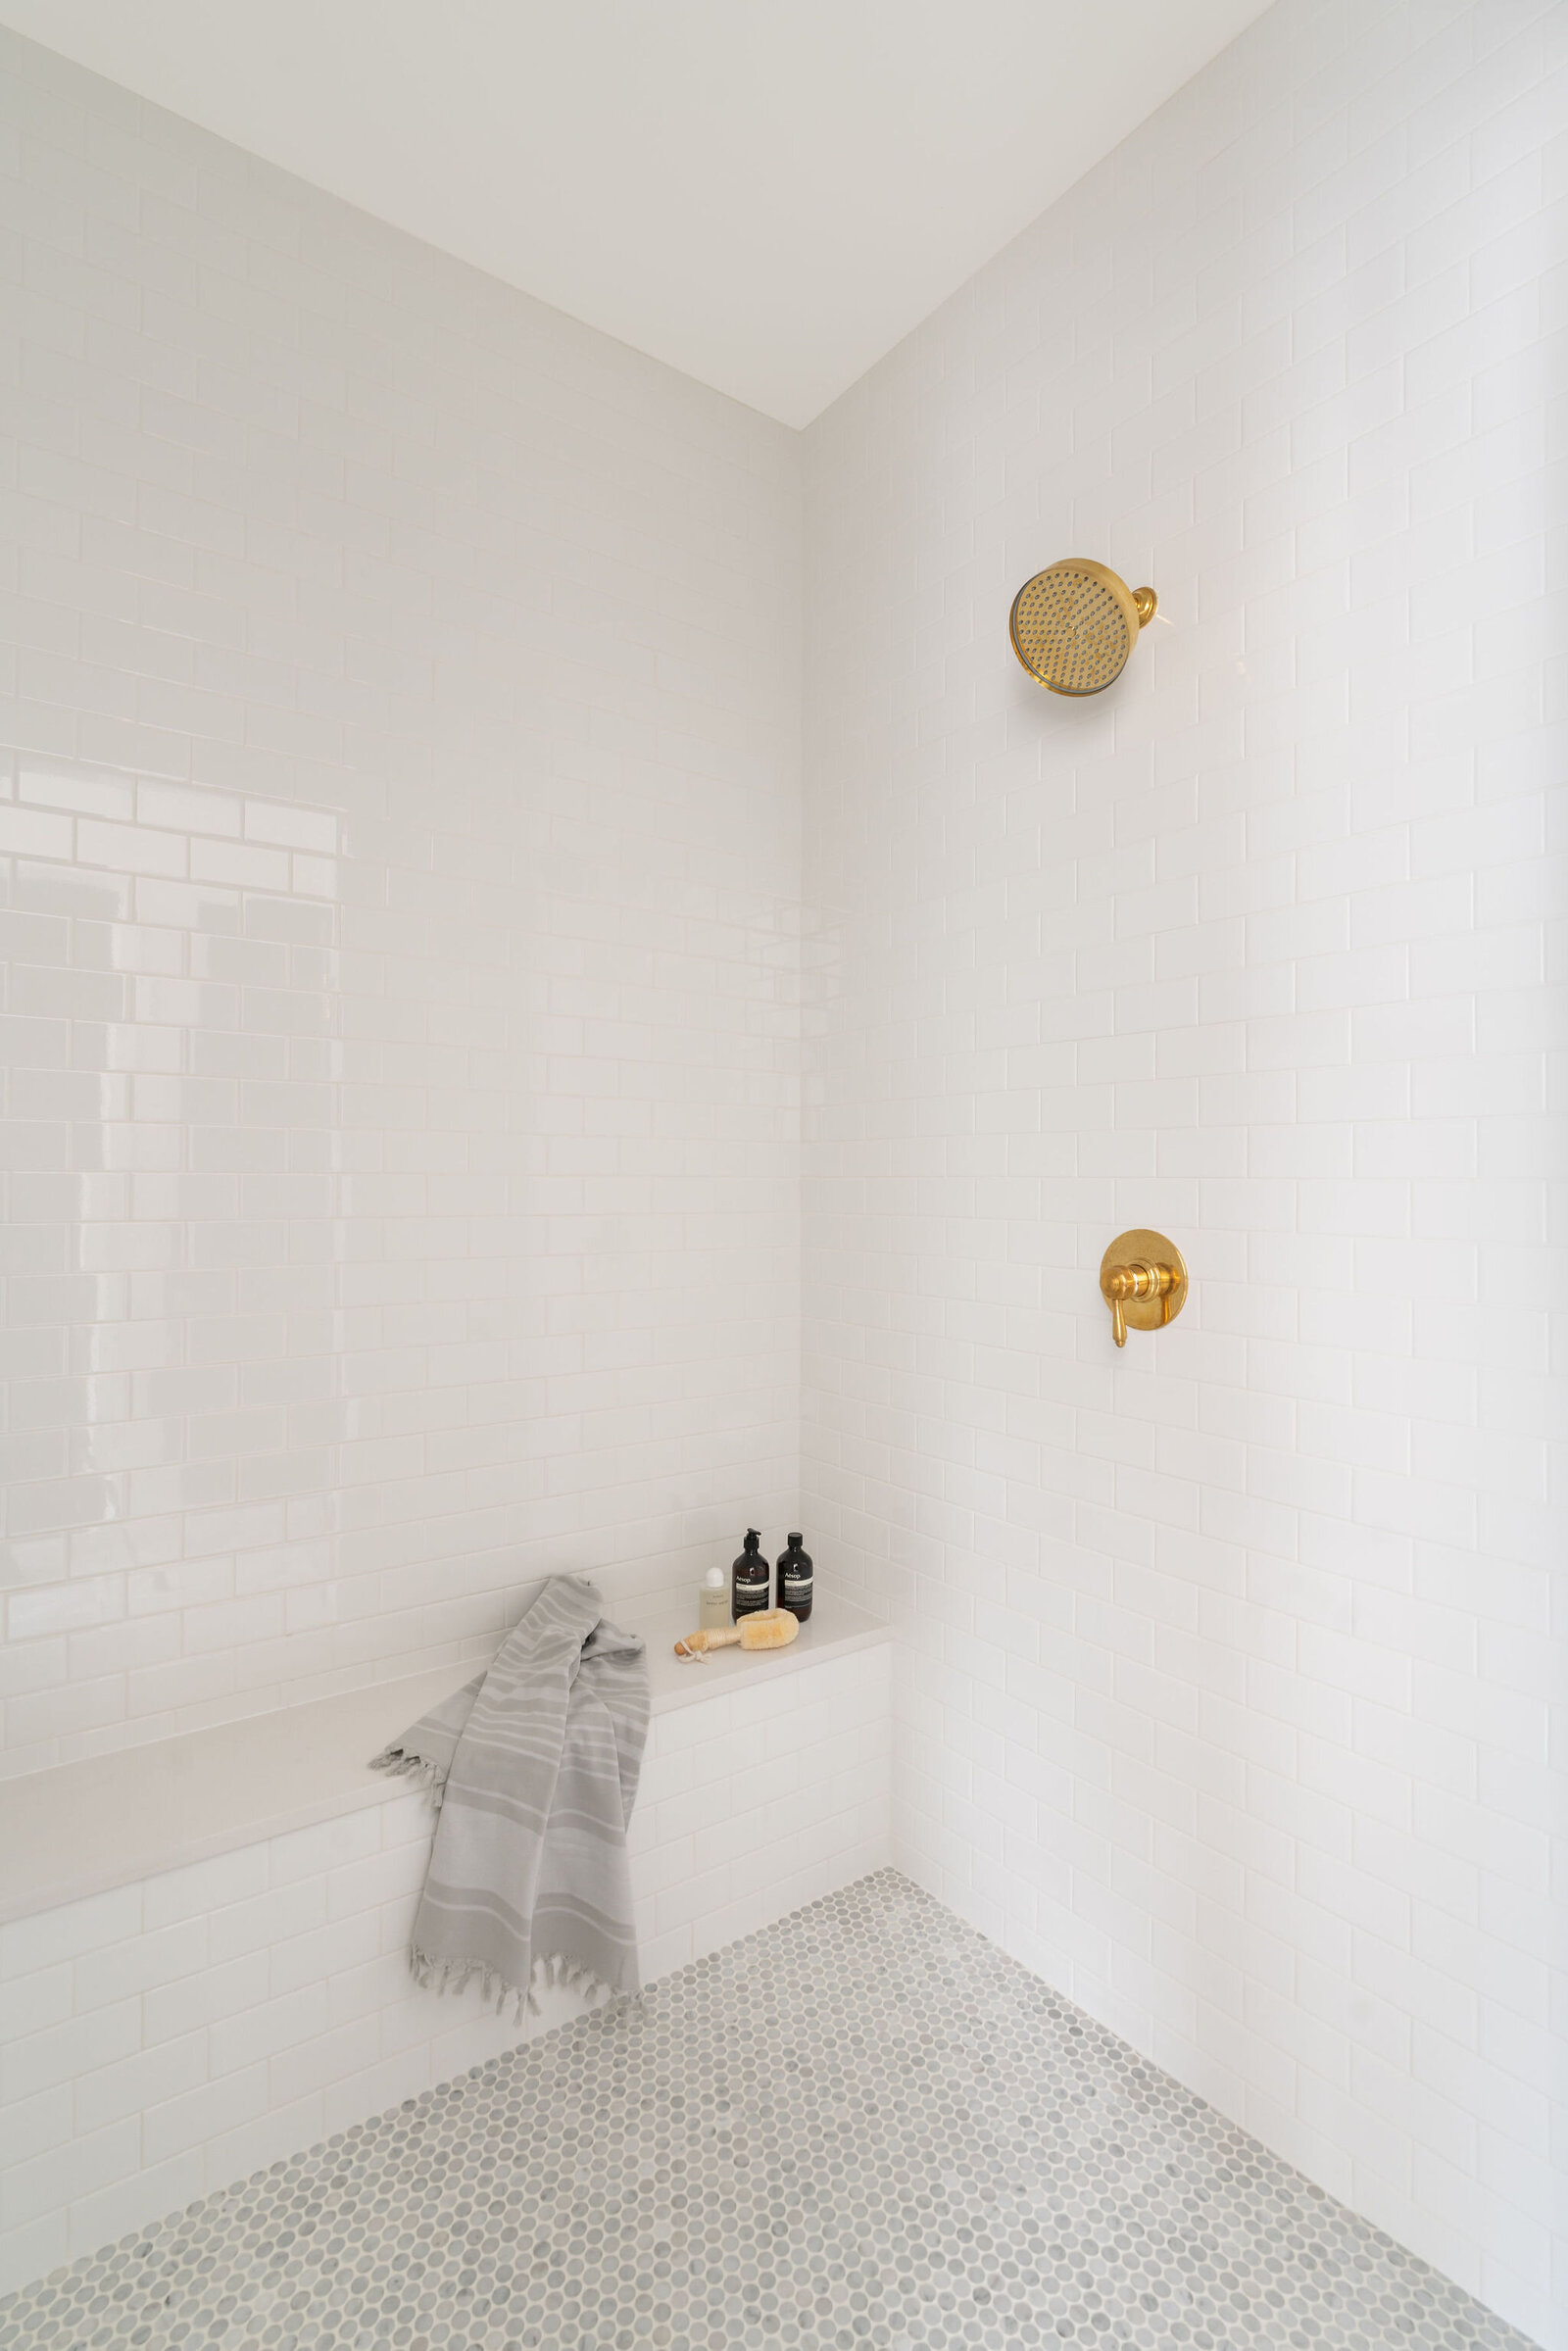 NuelaDesign_White Subway Tile Shower and marble pennyround floor